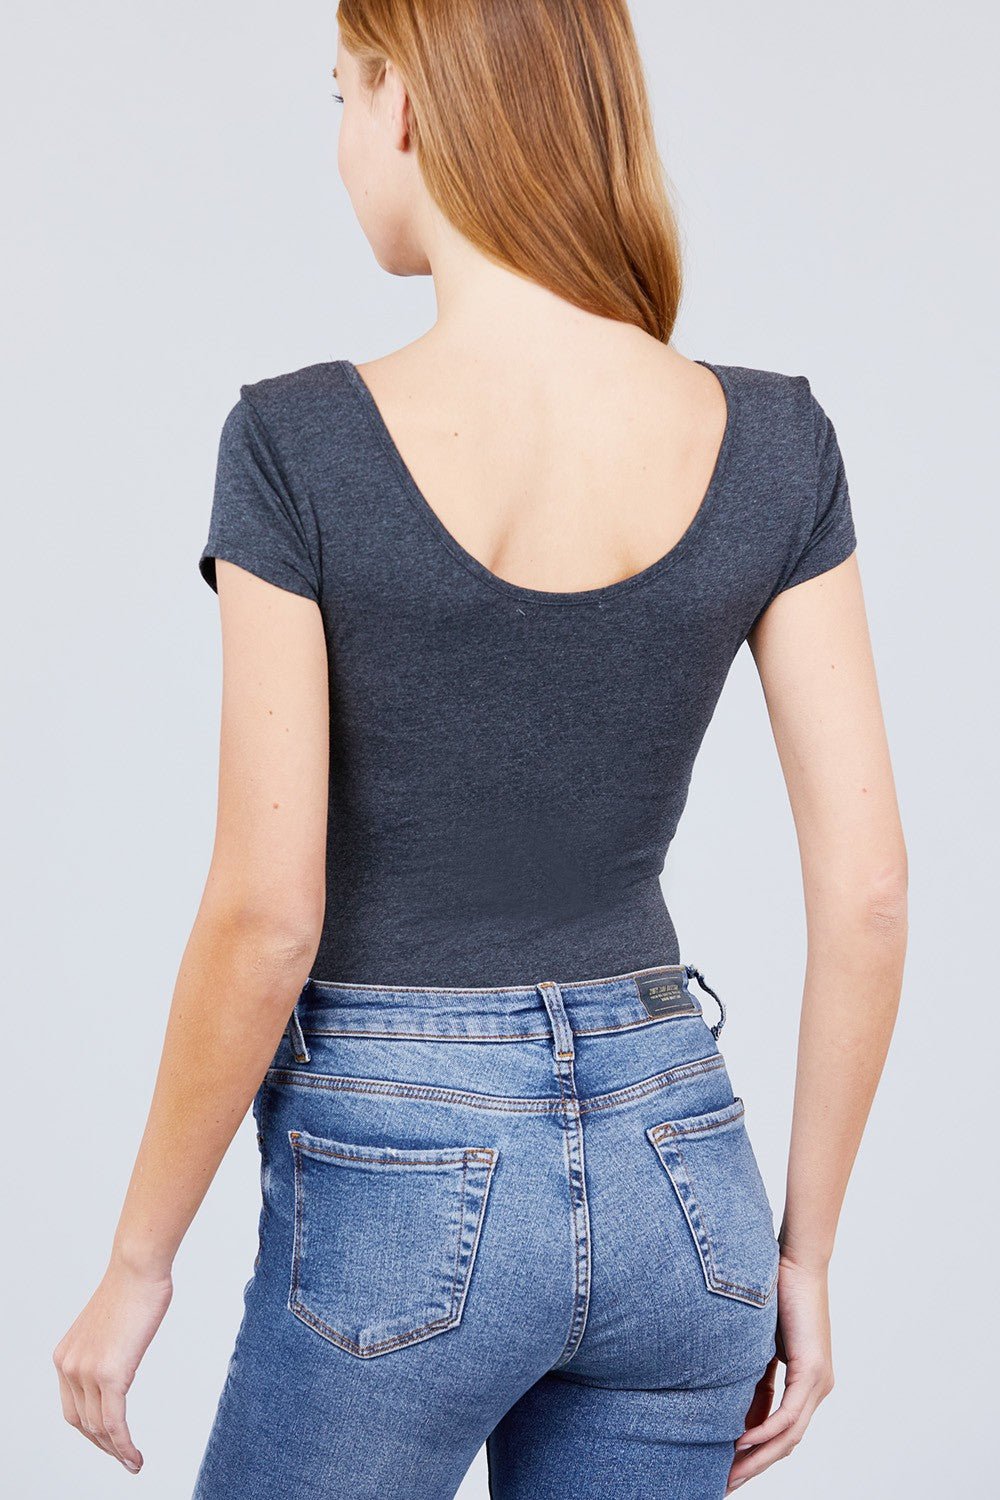 Our Best 95% Cotton 5% Spandex Solid Short Sleeve Scoop Neck Bodysuit (Charcoal Grey)